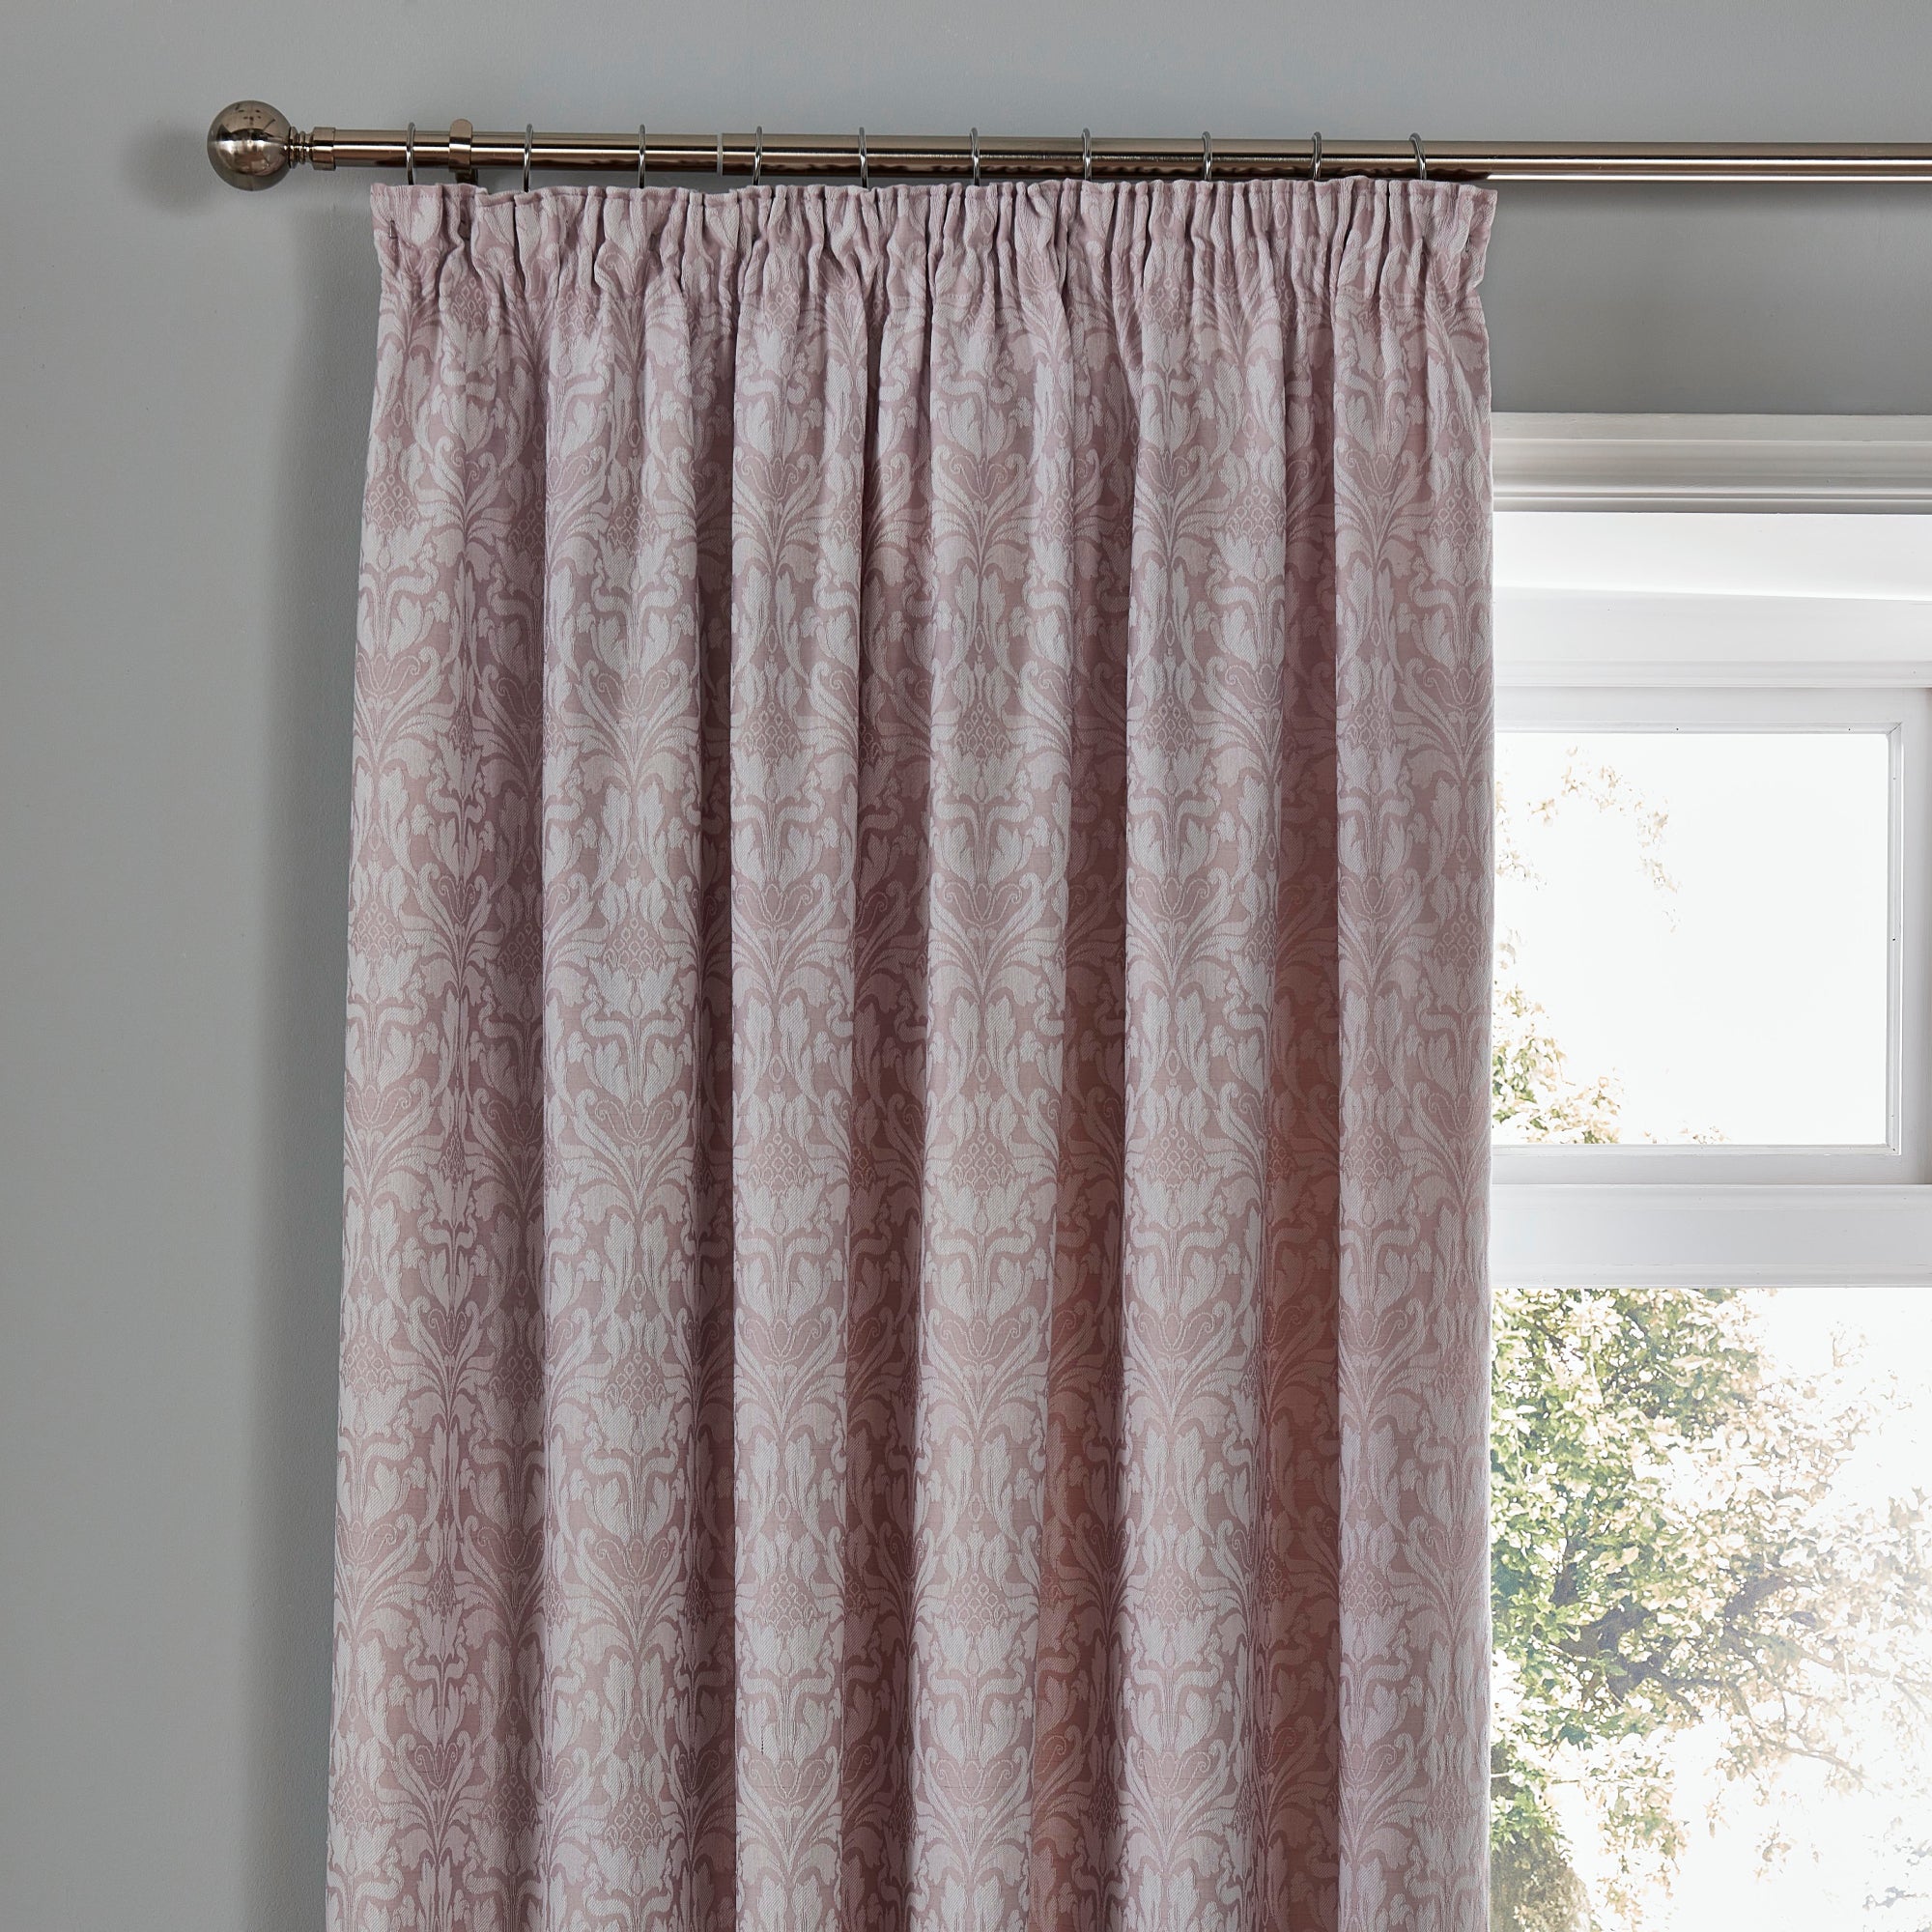 Photos - Curtains & Drapes Woven Hawthorne Lavender Pair of Pencil Pleat Curtains With Tie Backs Lave 